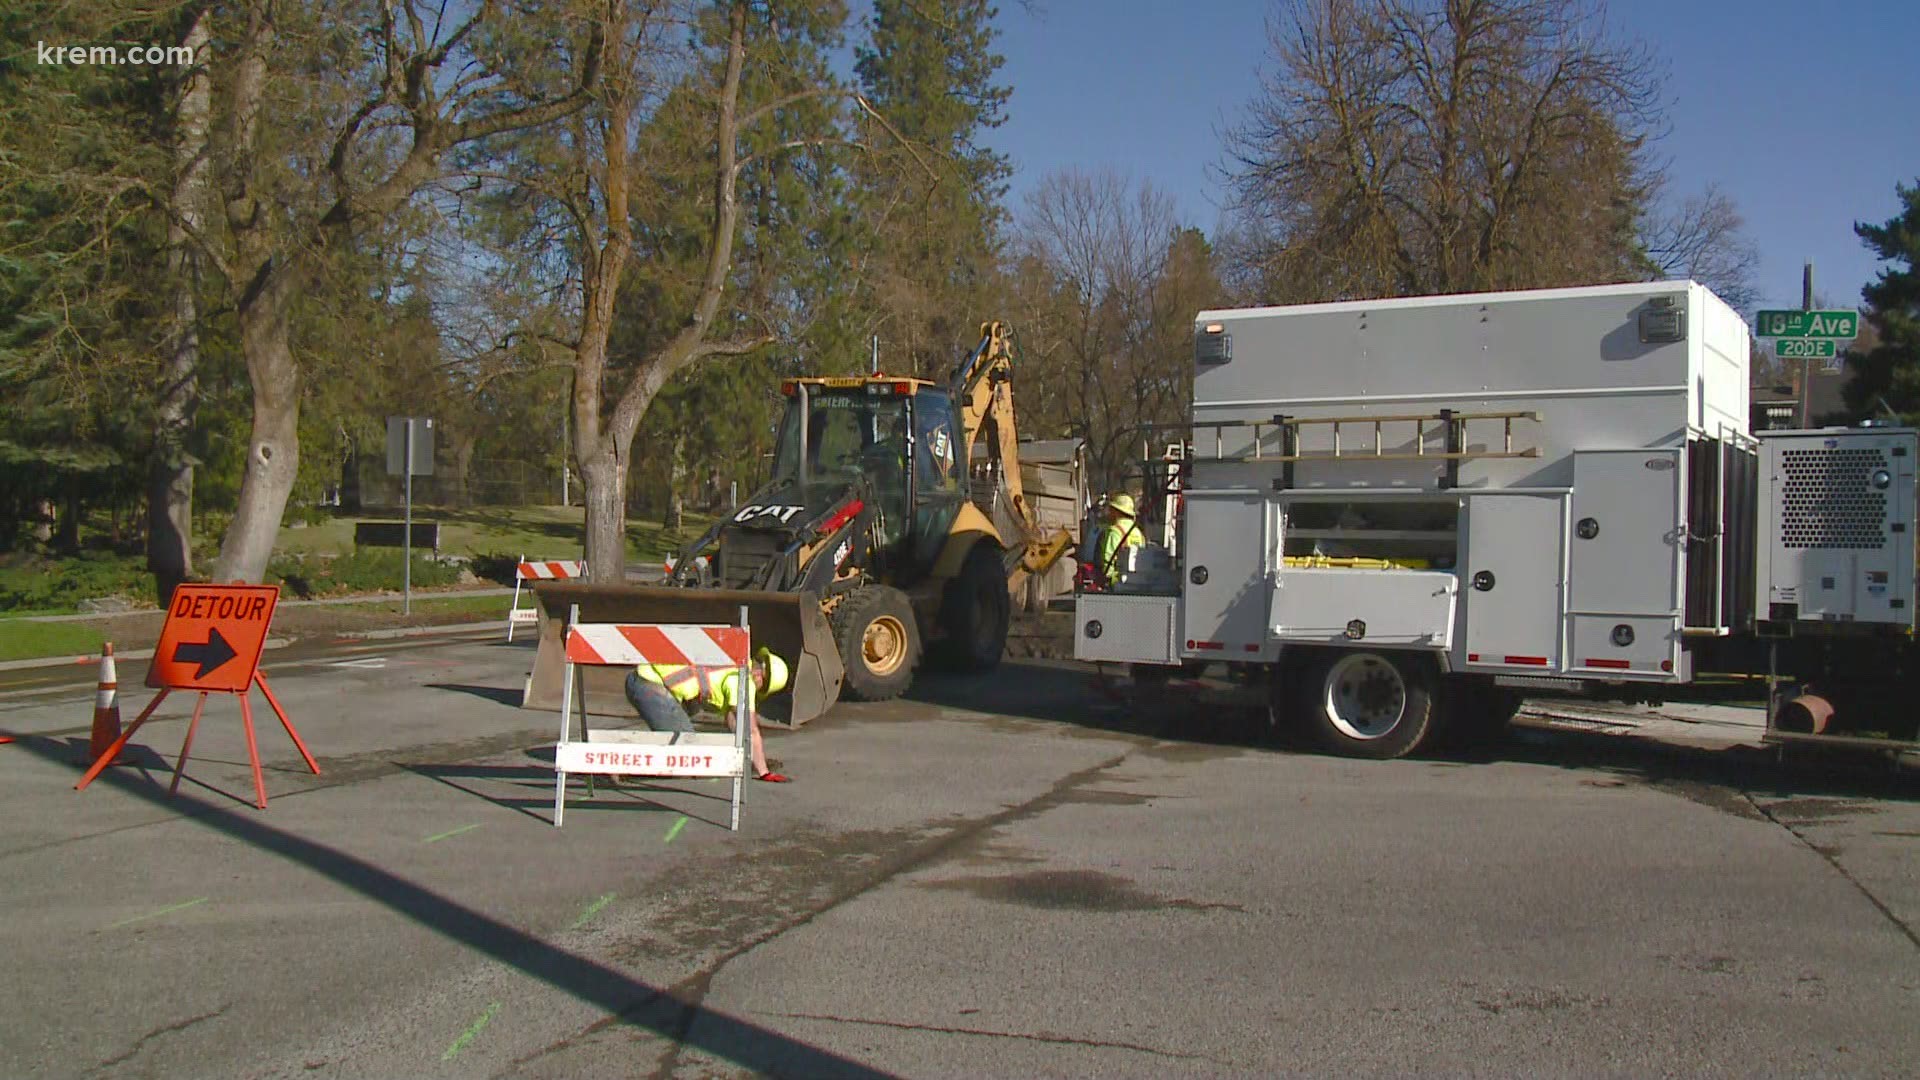 The City of Spokane tweeted on Monday morning that Grand Boulevard was reduced to one southbound lane near 18th Avenue as crews worked to repair a water main break.